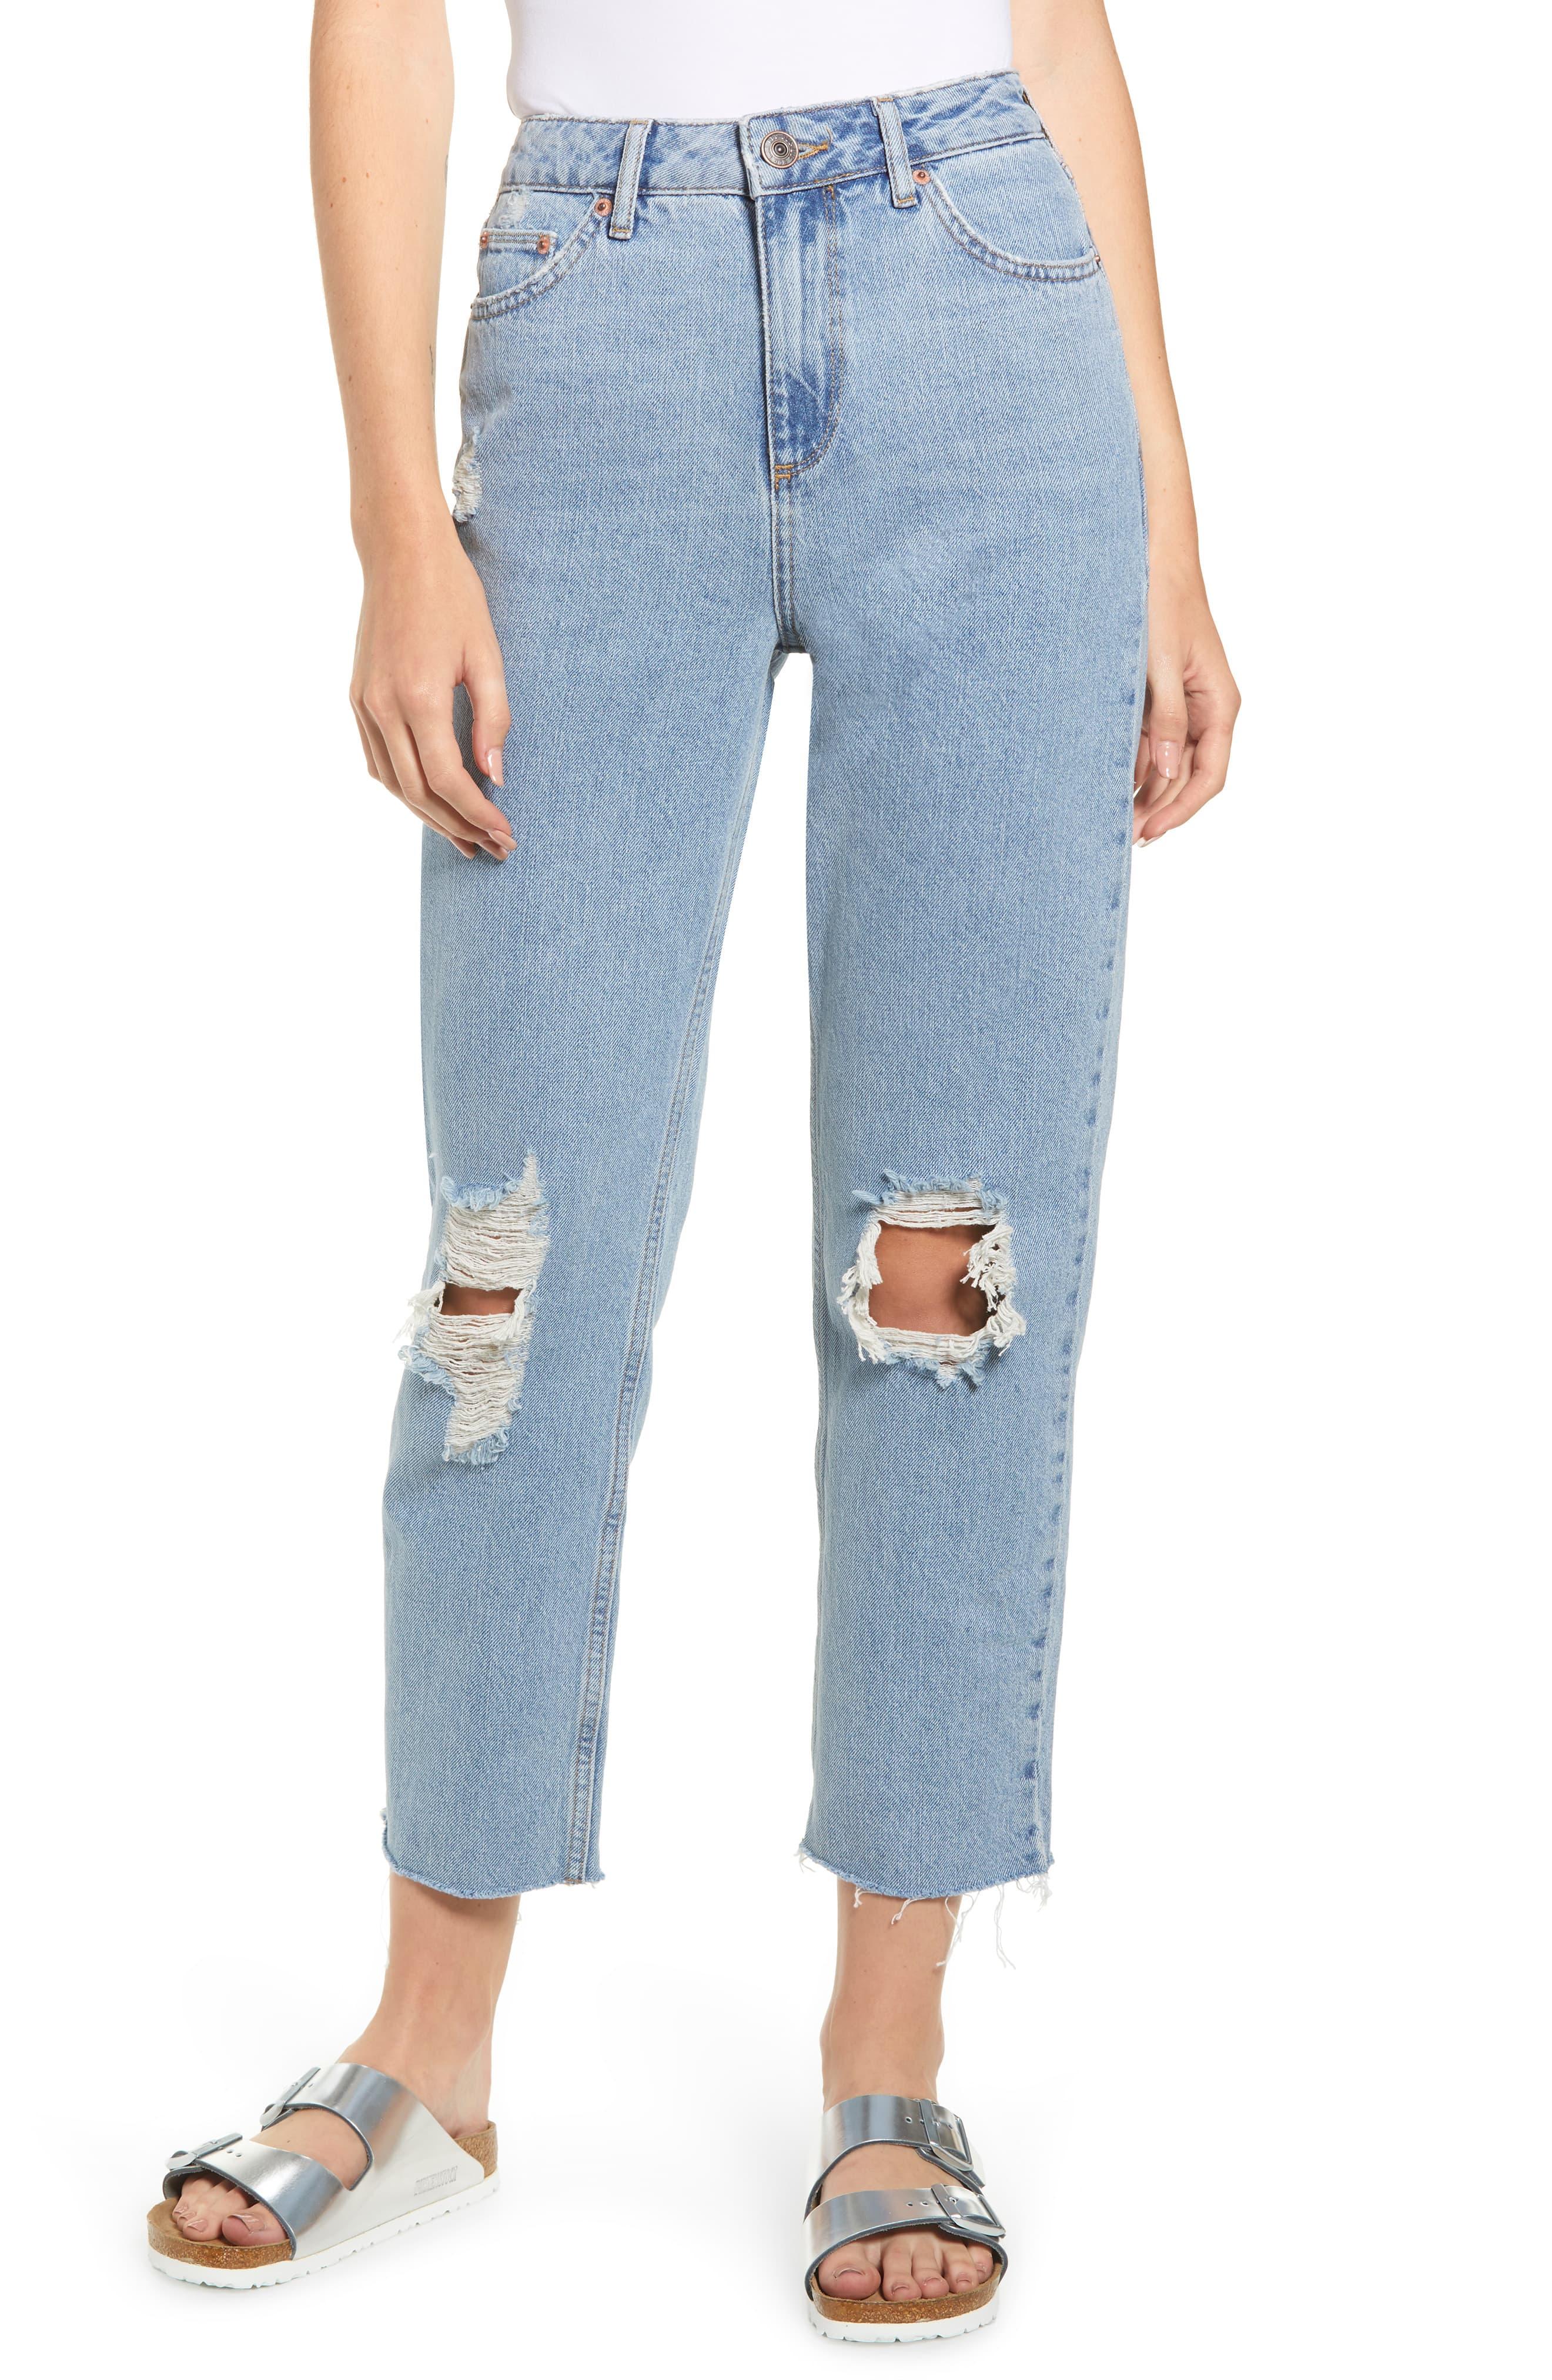 BDG Urban Outfitters Pax Ripped High Waist Jeans in Blue - Lyst